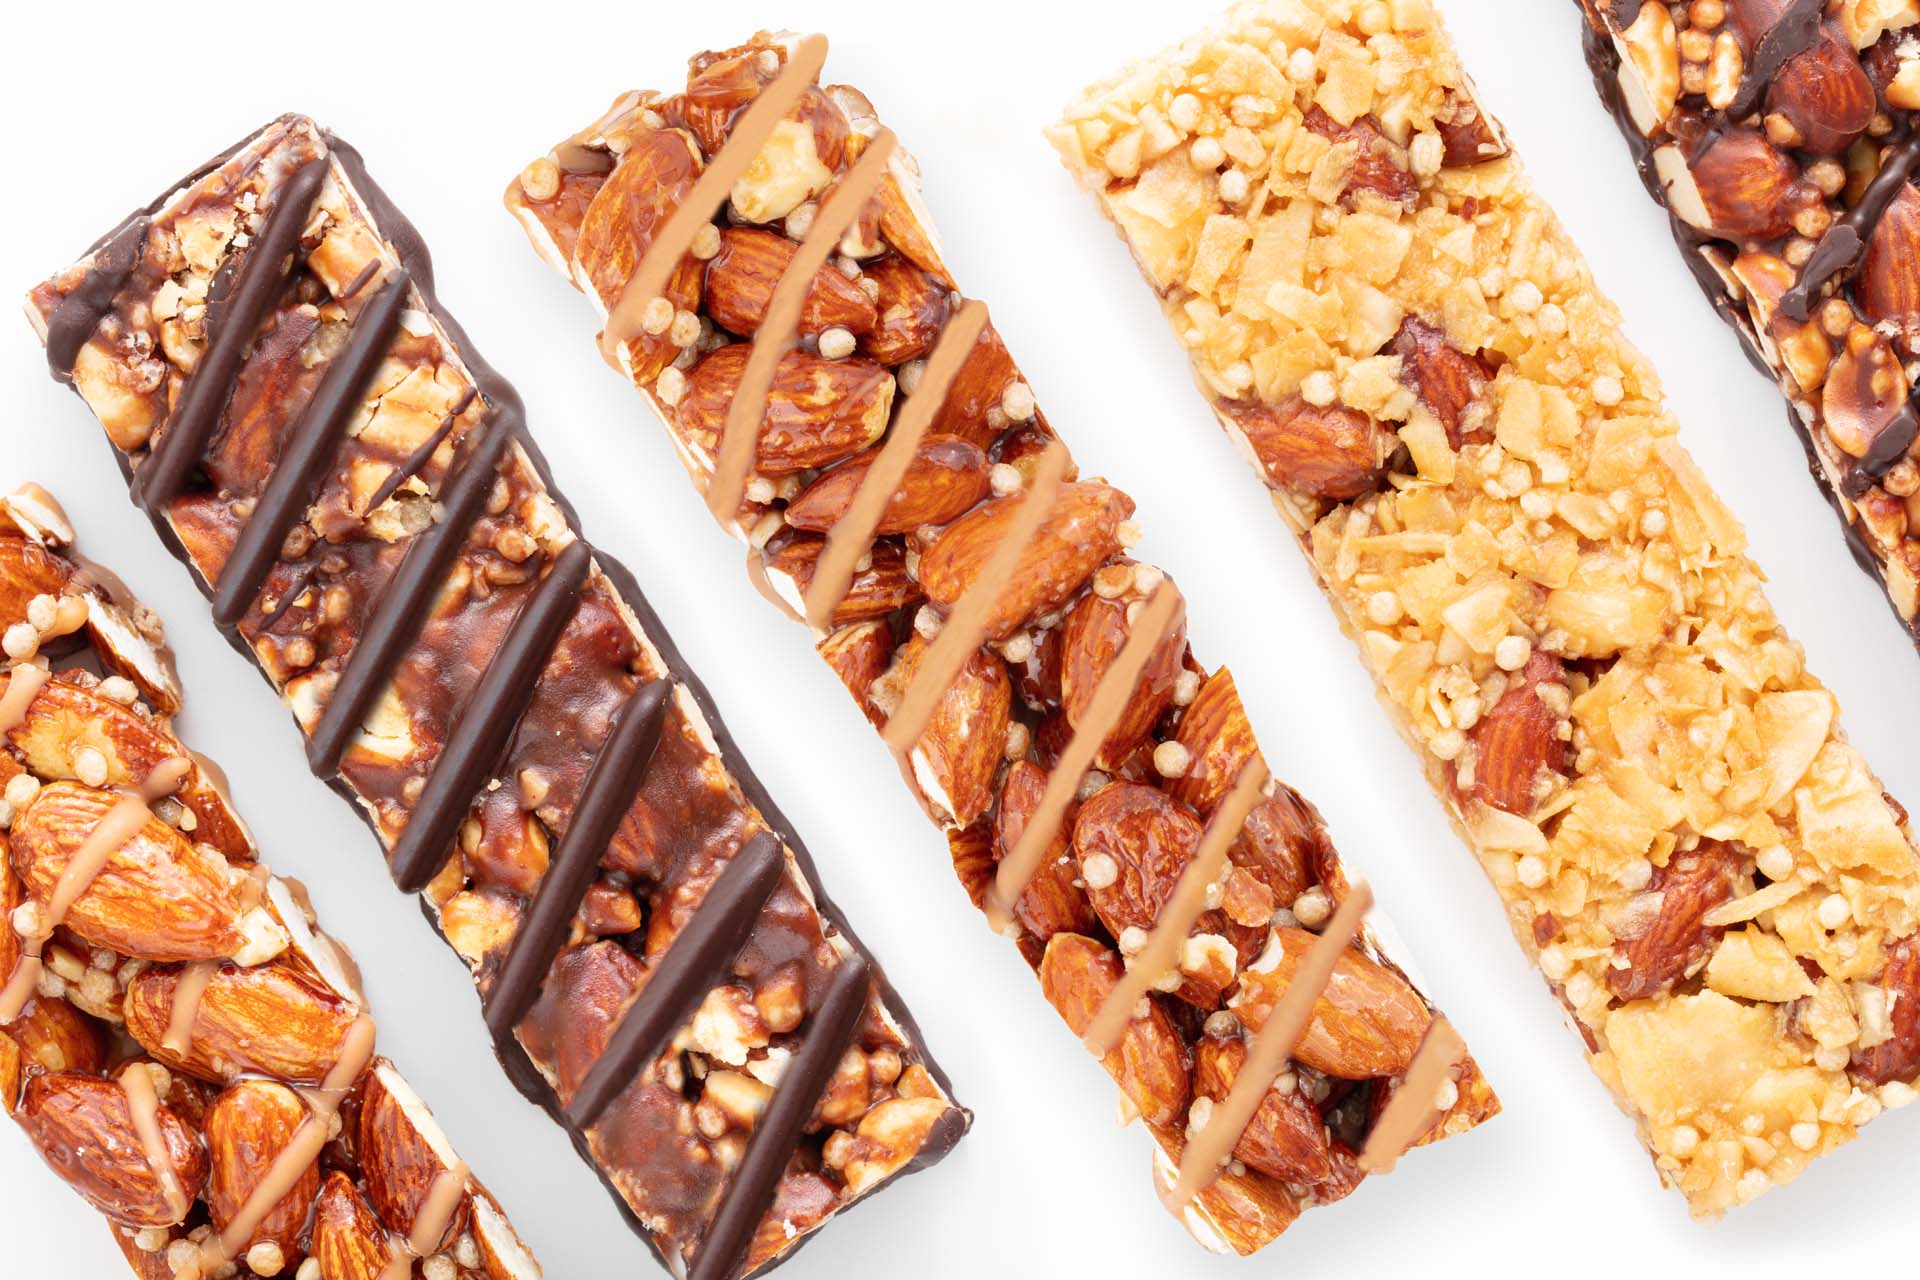 Assortment of Energy, Health and Breakfast Bars made with Whole